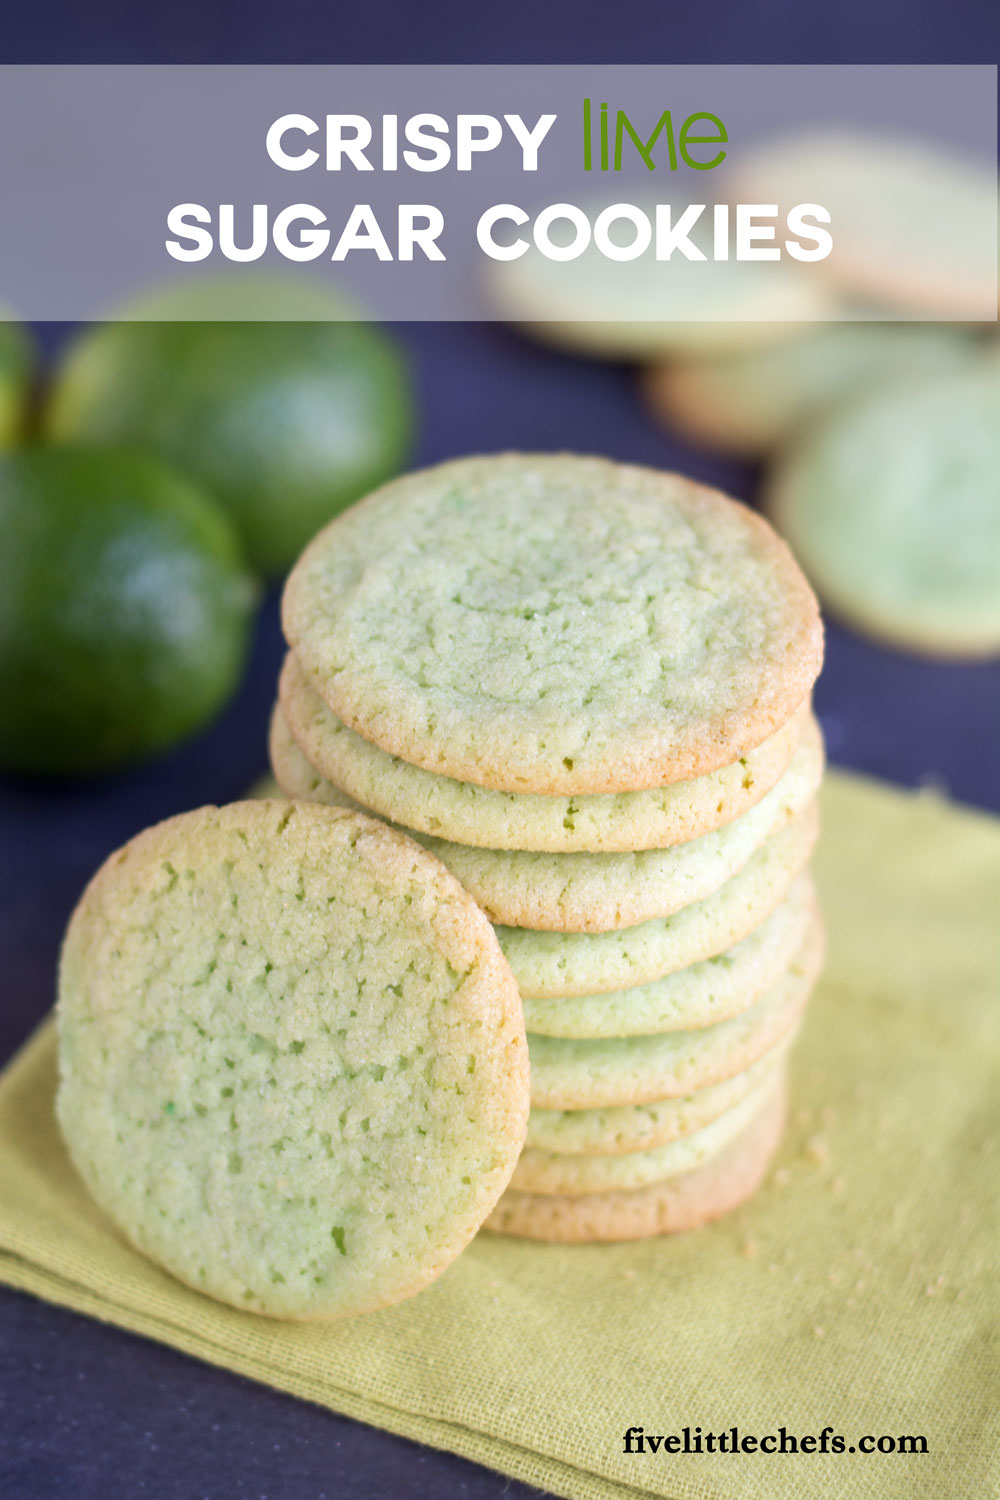 Crispy Lime Sugar Cookies are sweet and refreshing. This recipe is a perfect treat for families or parties. Tint them green for St. Patrick's Day.